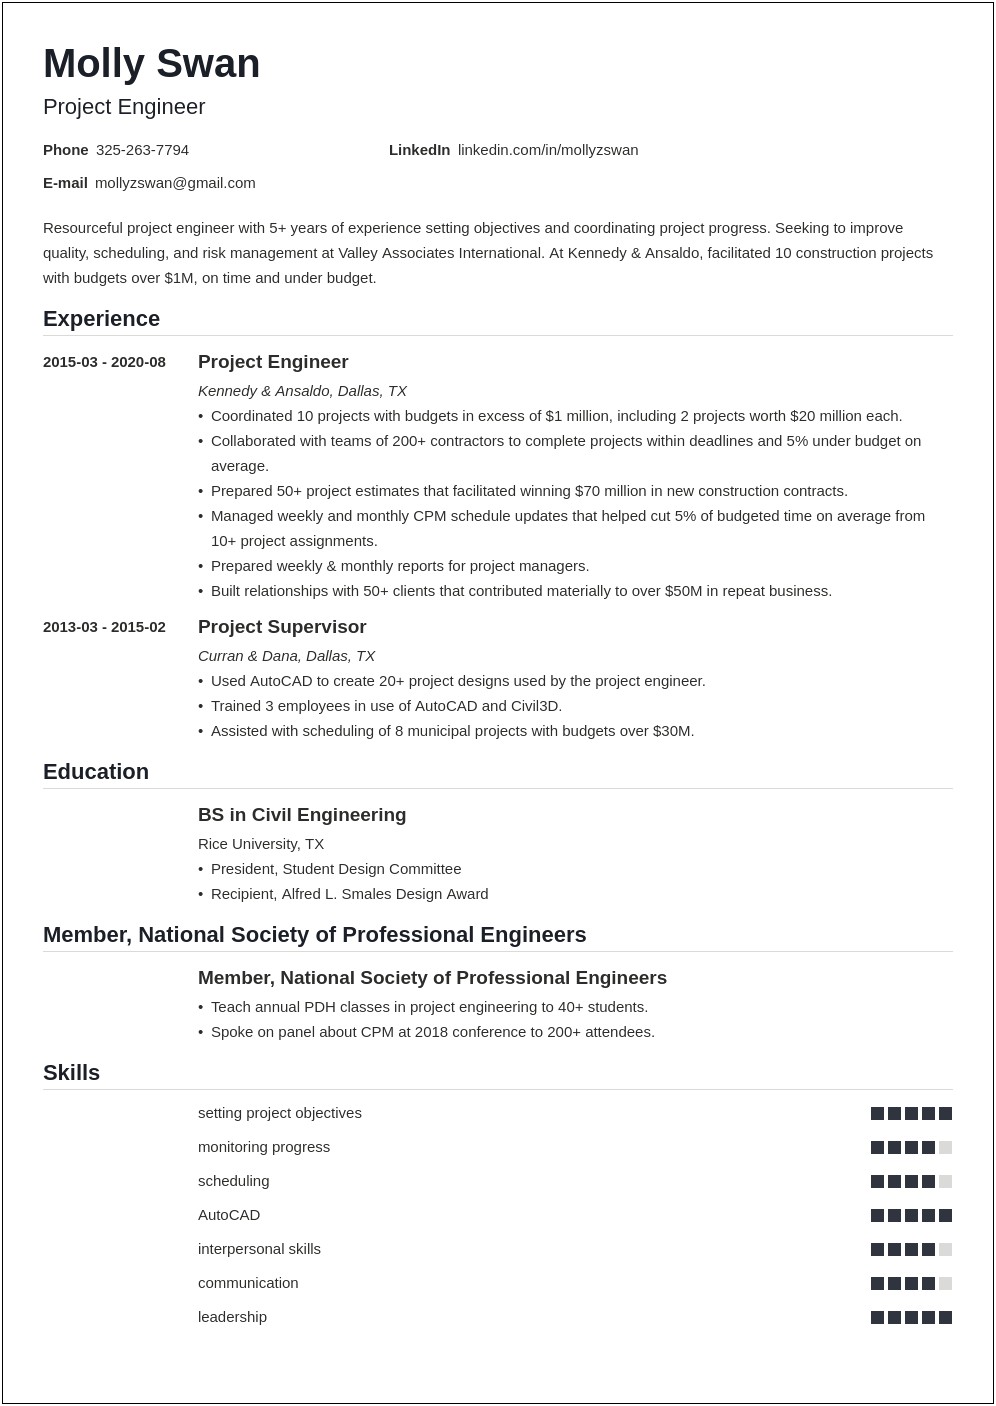 Sample Resume Experience In New Construction At University